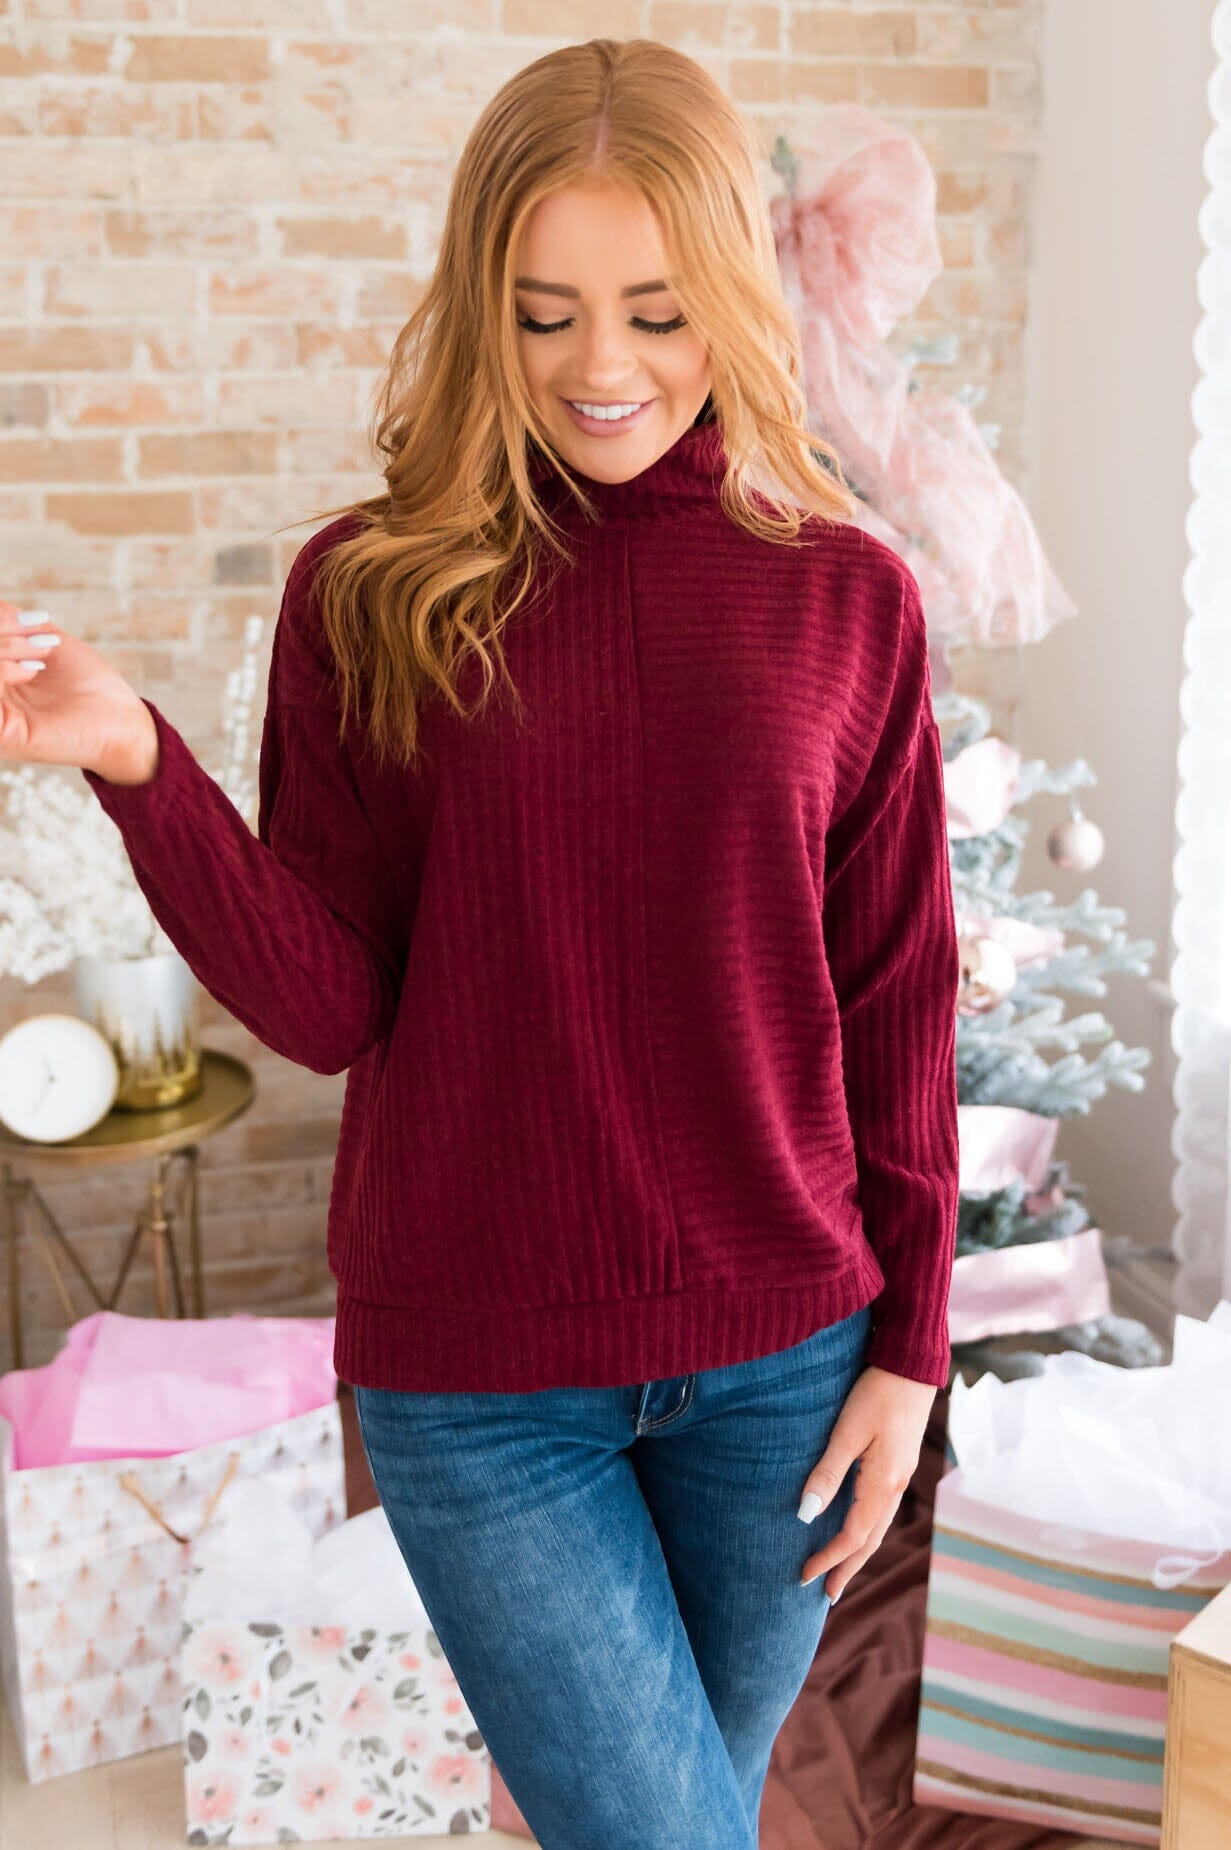 Meet Me By The Campfire Modest Sweater